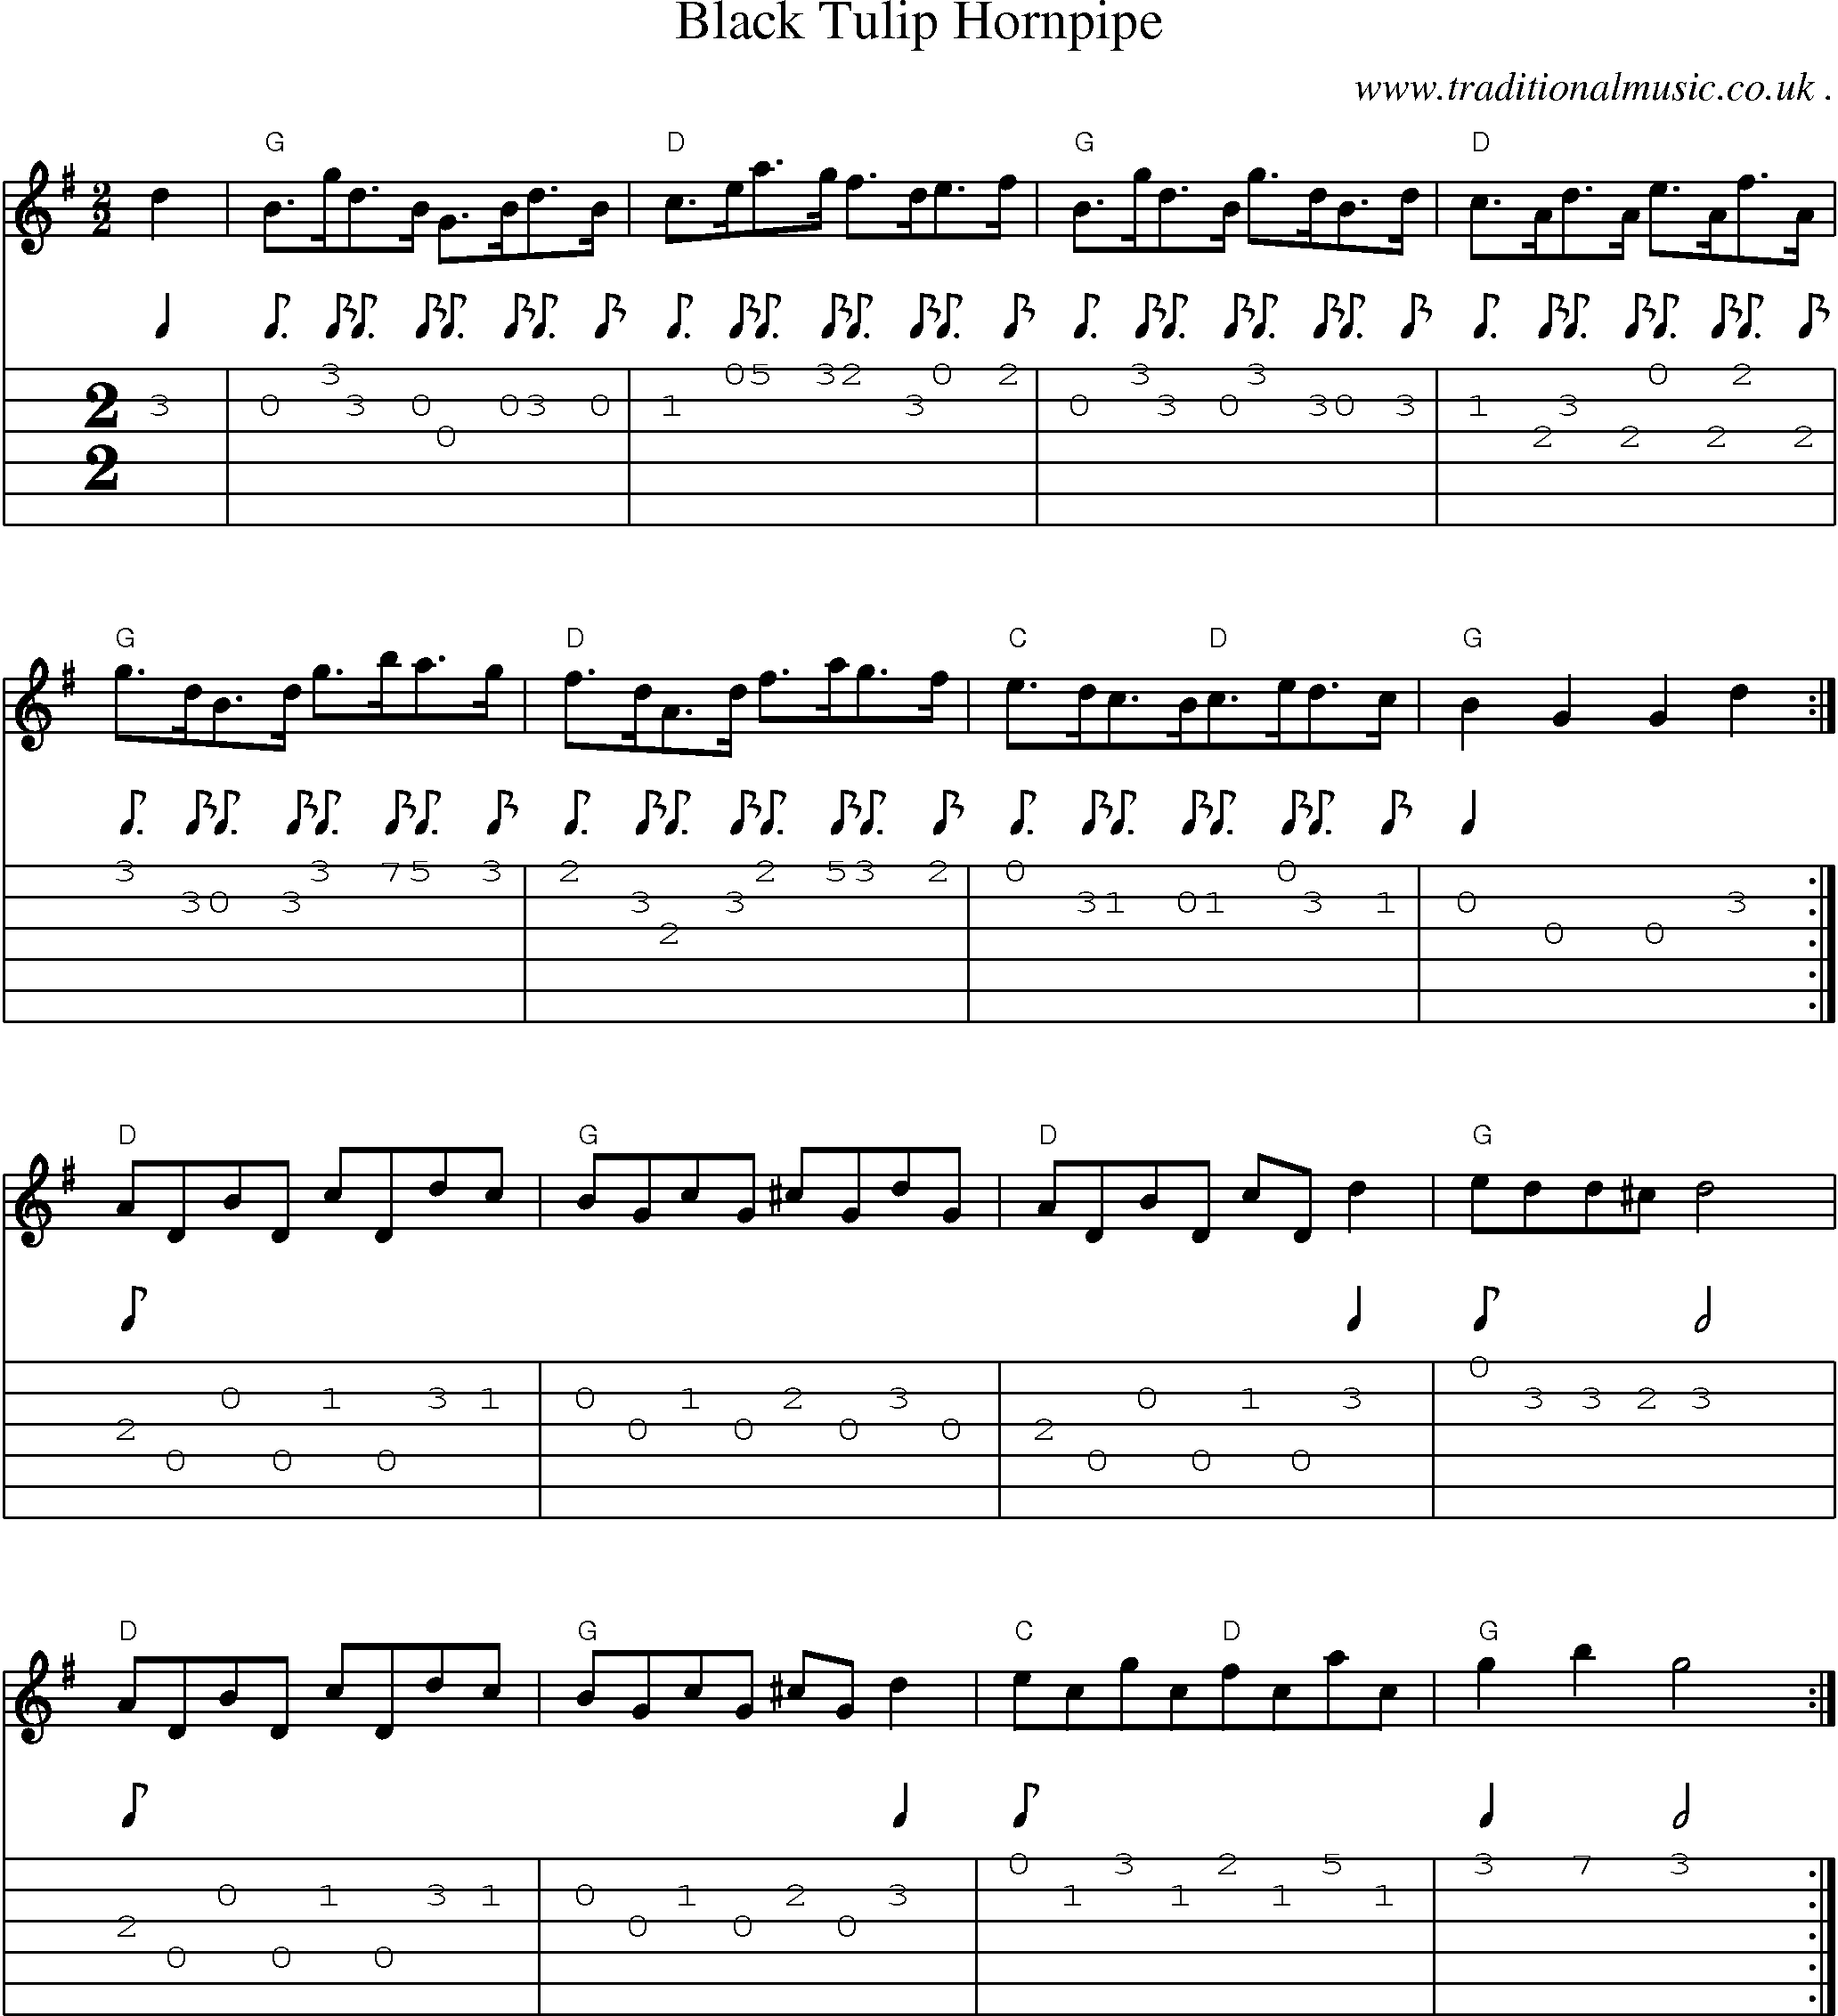 Sheet-Music and Guitar Tabs for Black Tulip Hornpipe